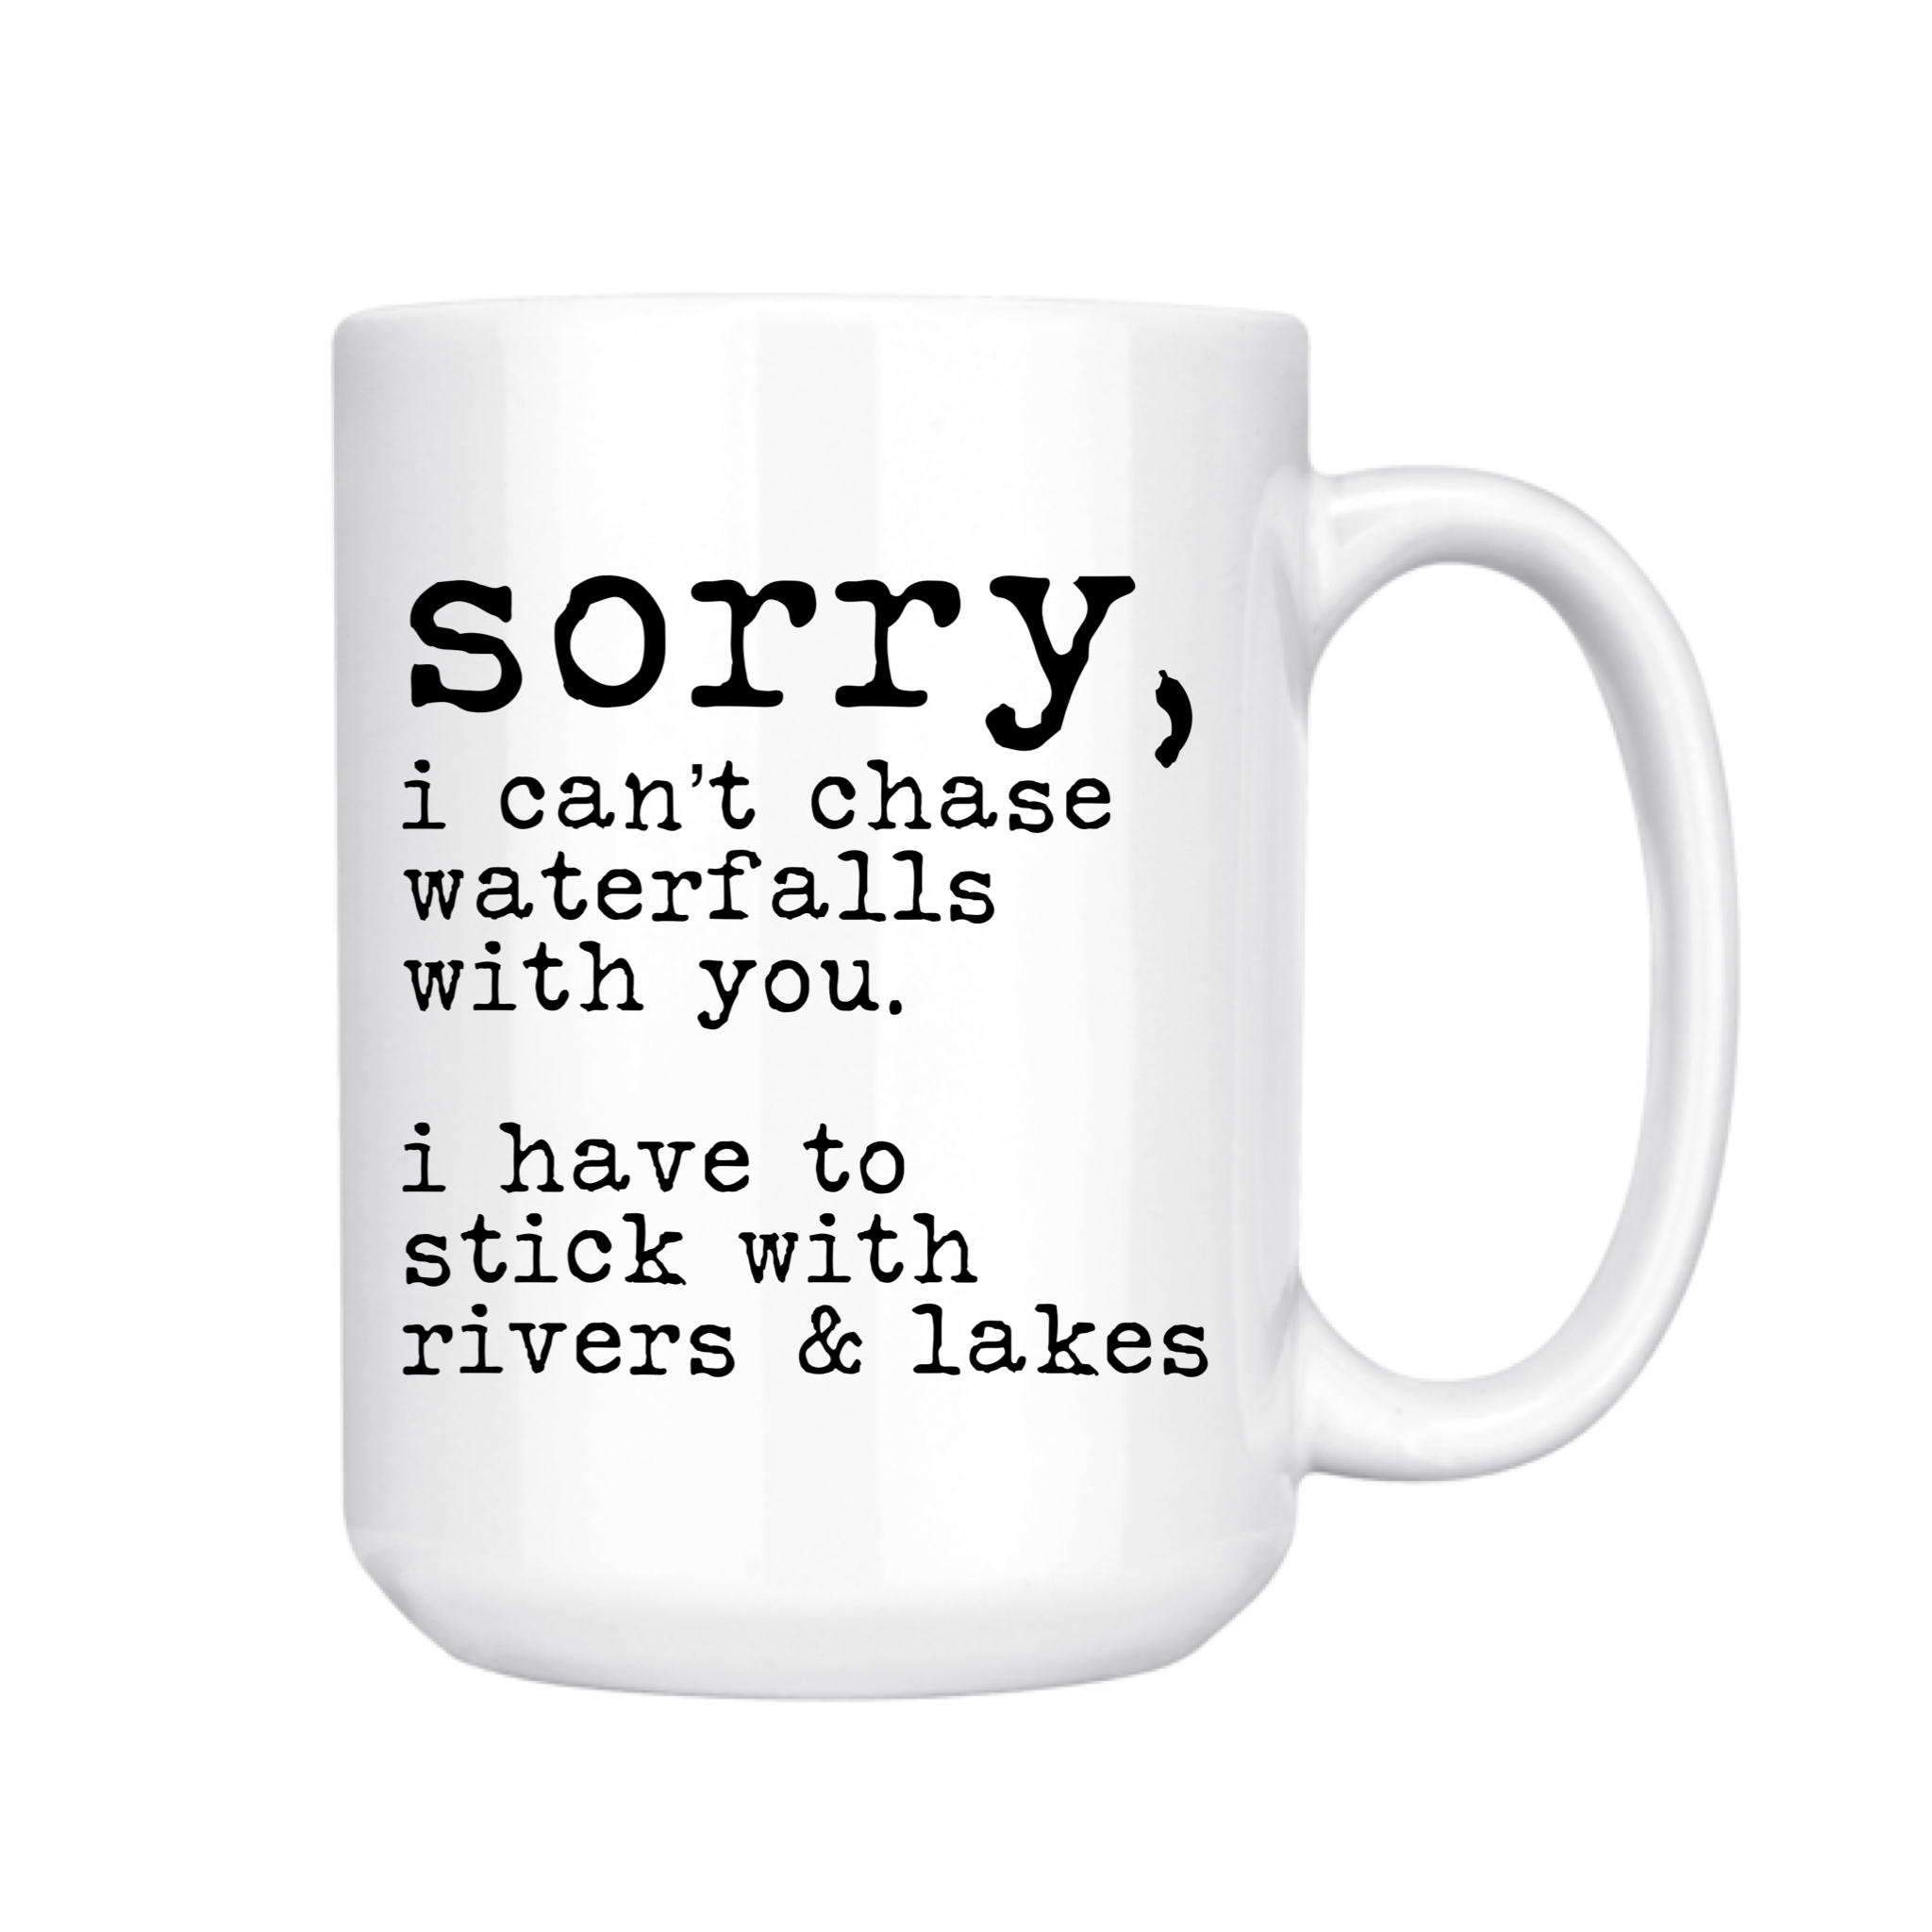 SORRY I CAN'T CHASE WATERFALLS WITH YOU MUG